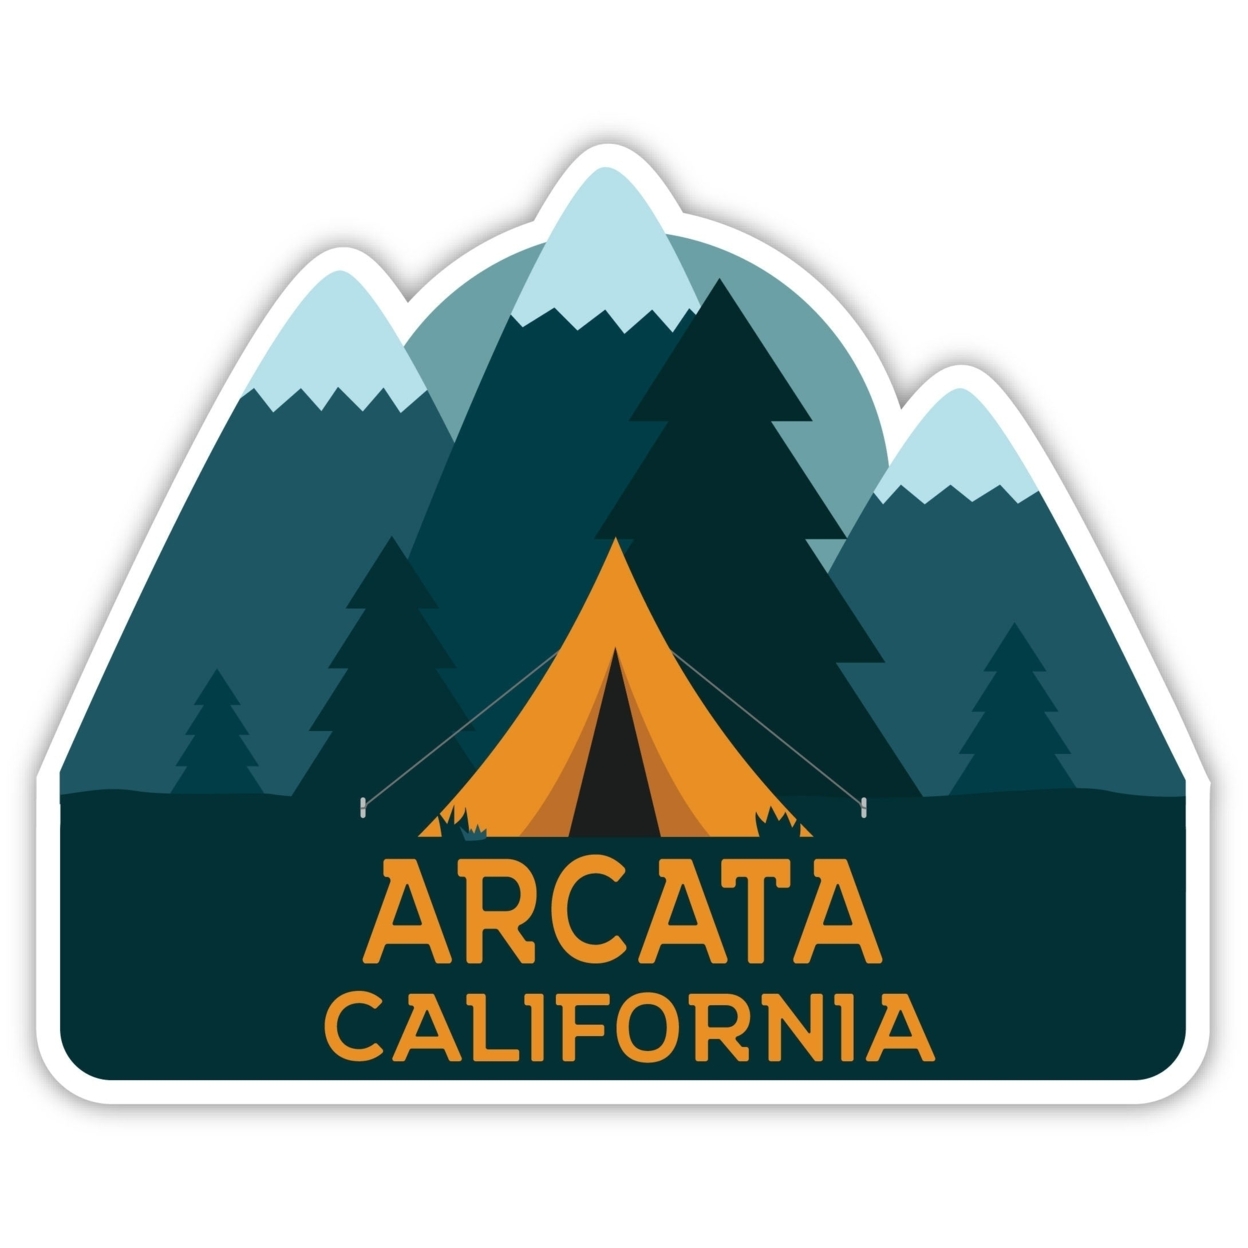 Arcata California Souvenir Decorative Stickers (Choose Theme And Size) - 4-Pack, 2-Inch, Tent